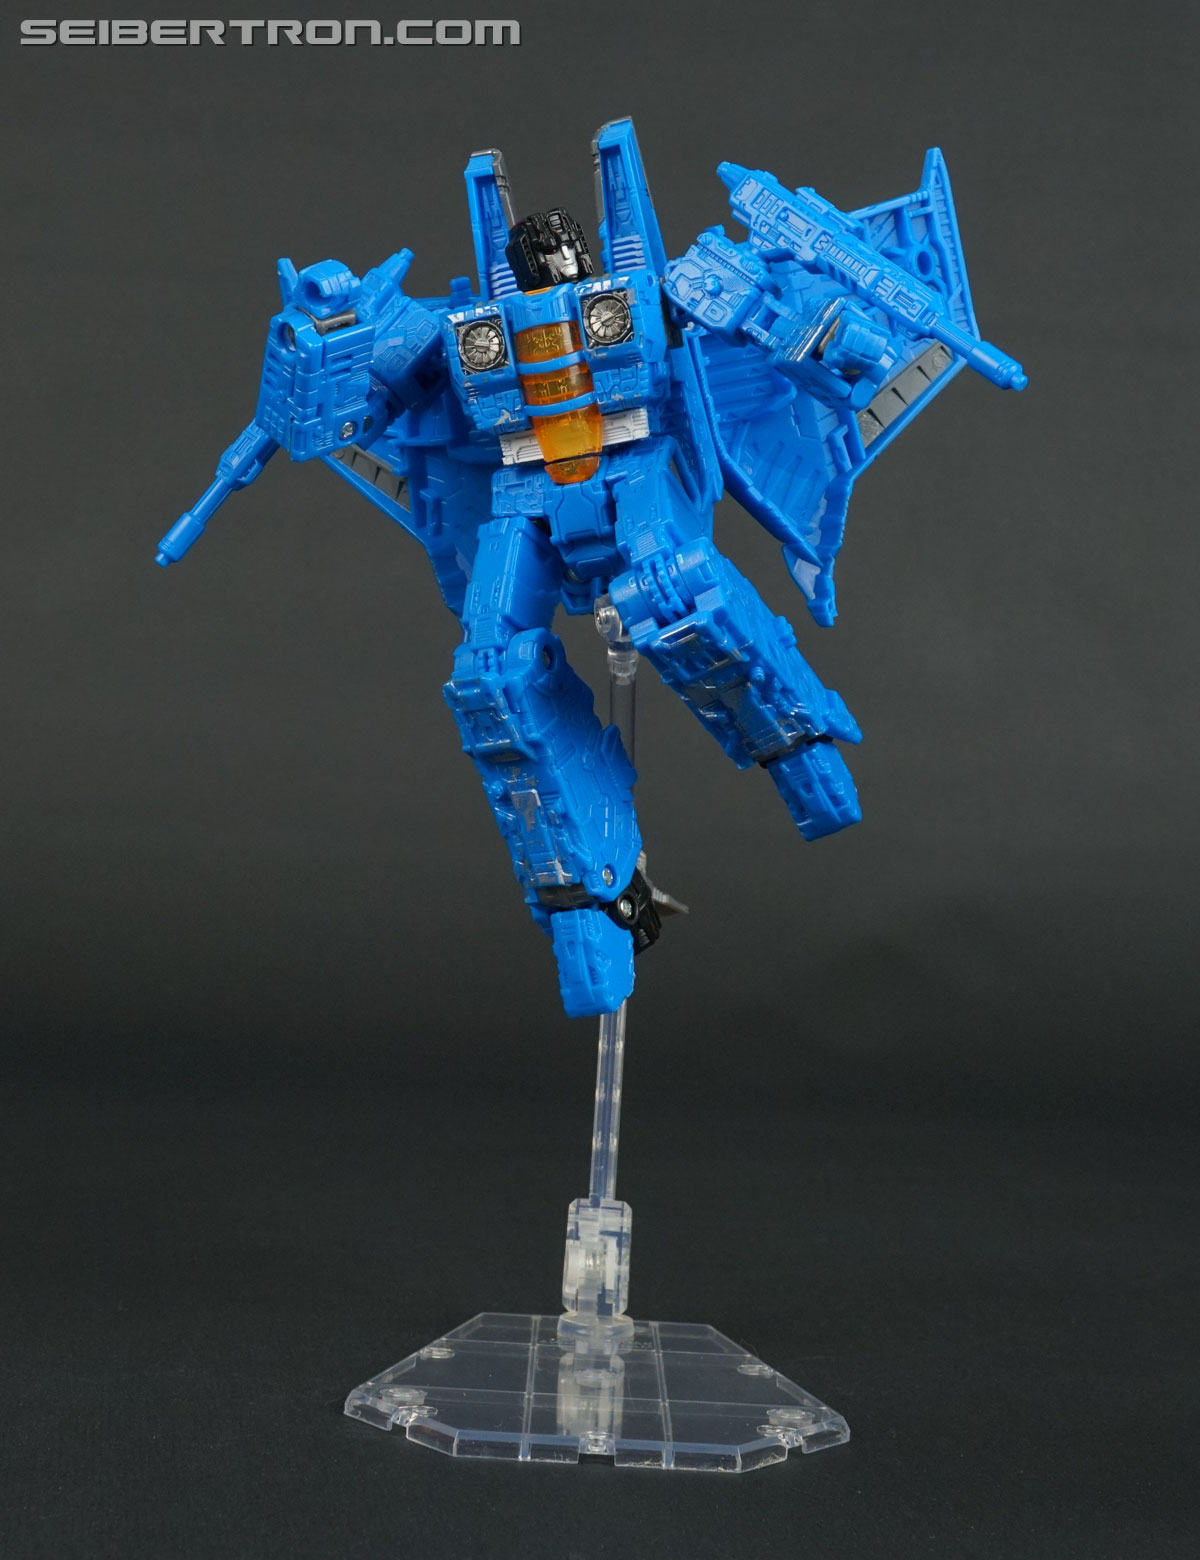 Transformers War for Cybertron: SIEGE Ion Storm (Seeker Ion Storm) (Image #86 of 111)